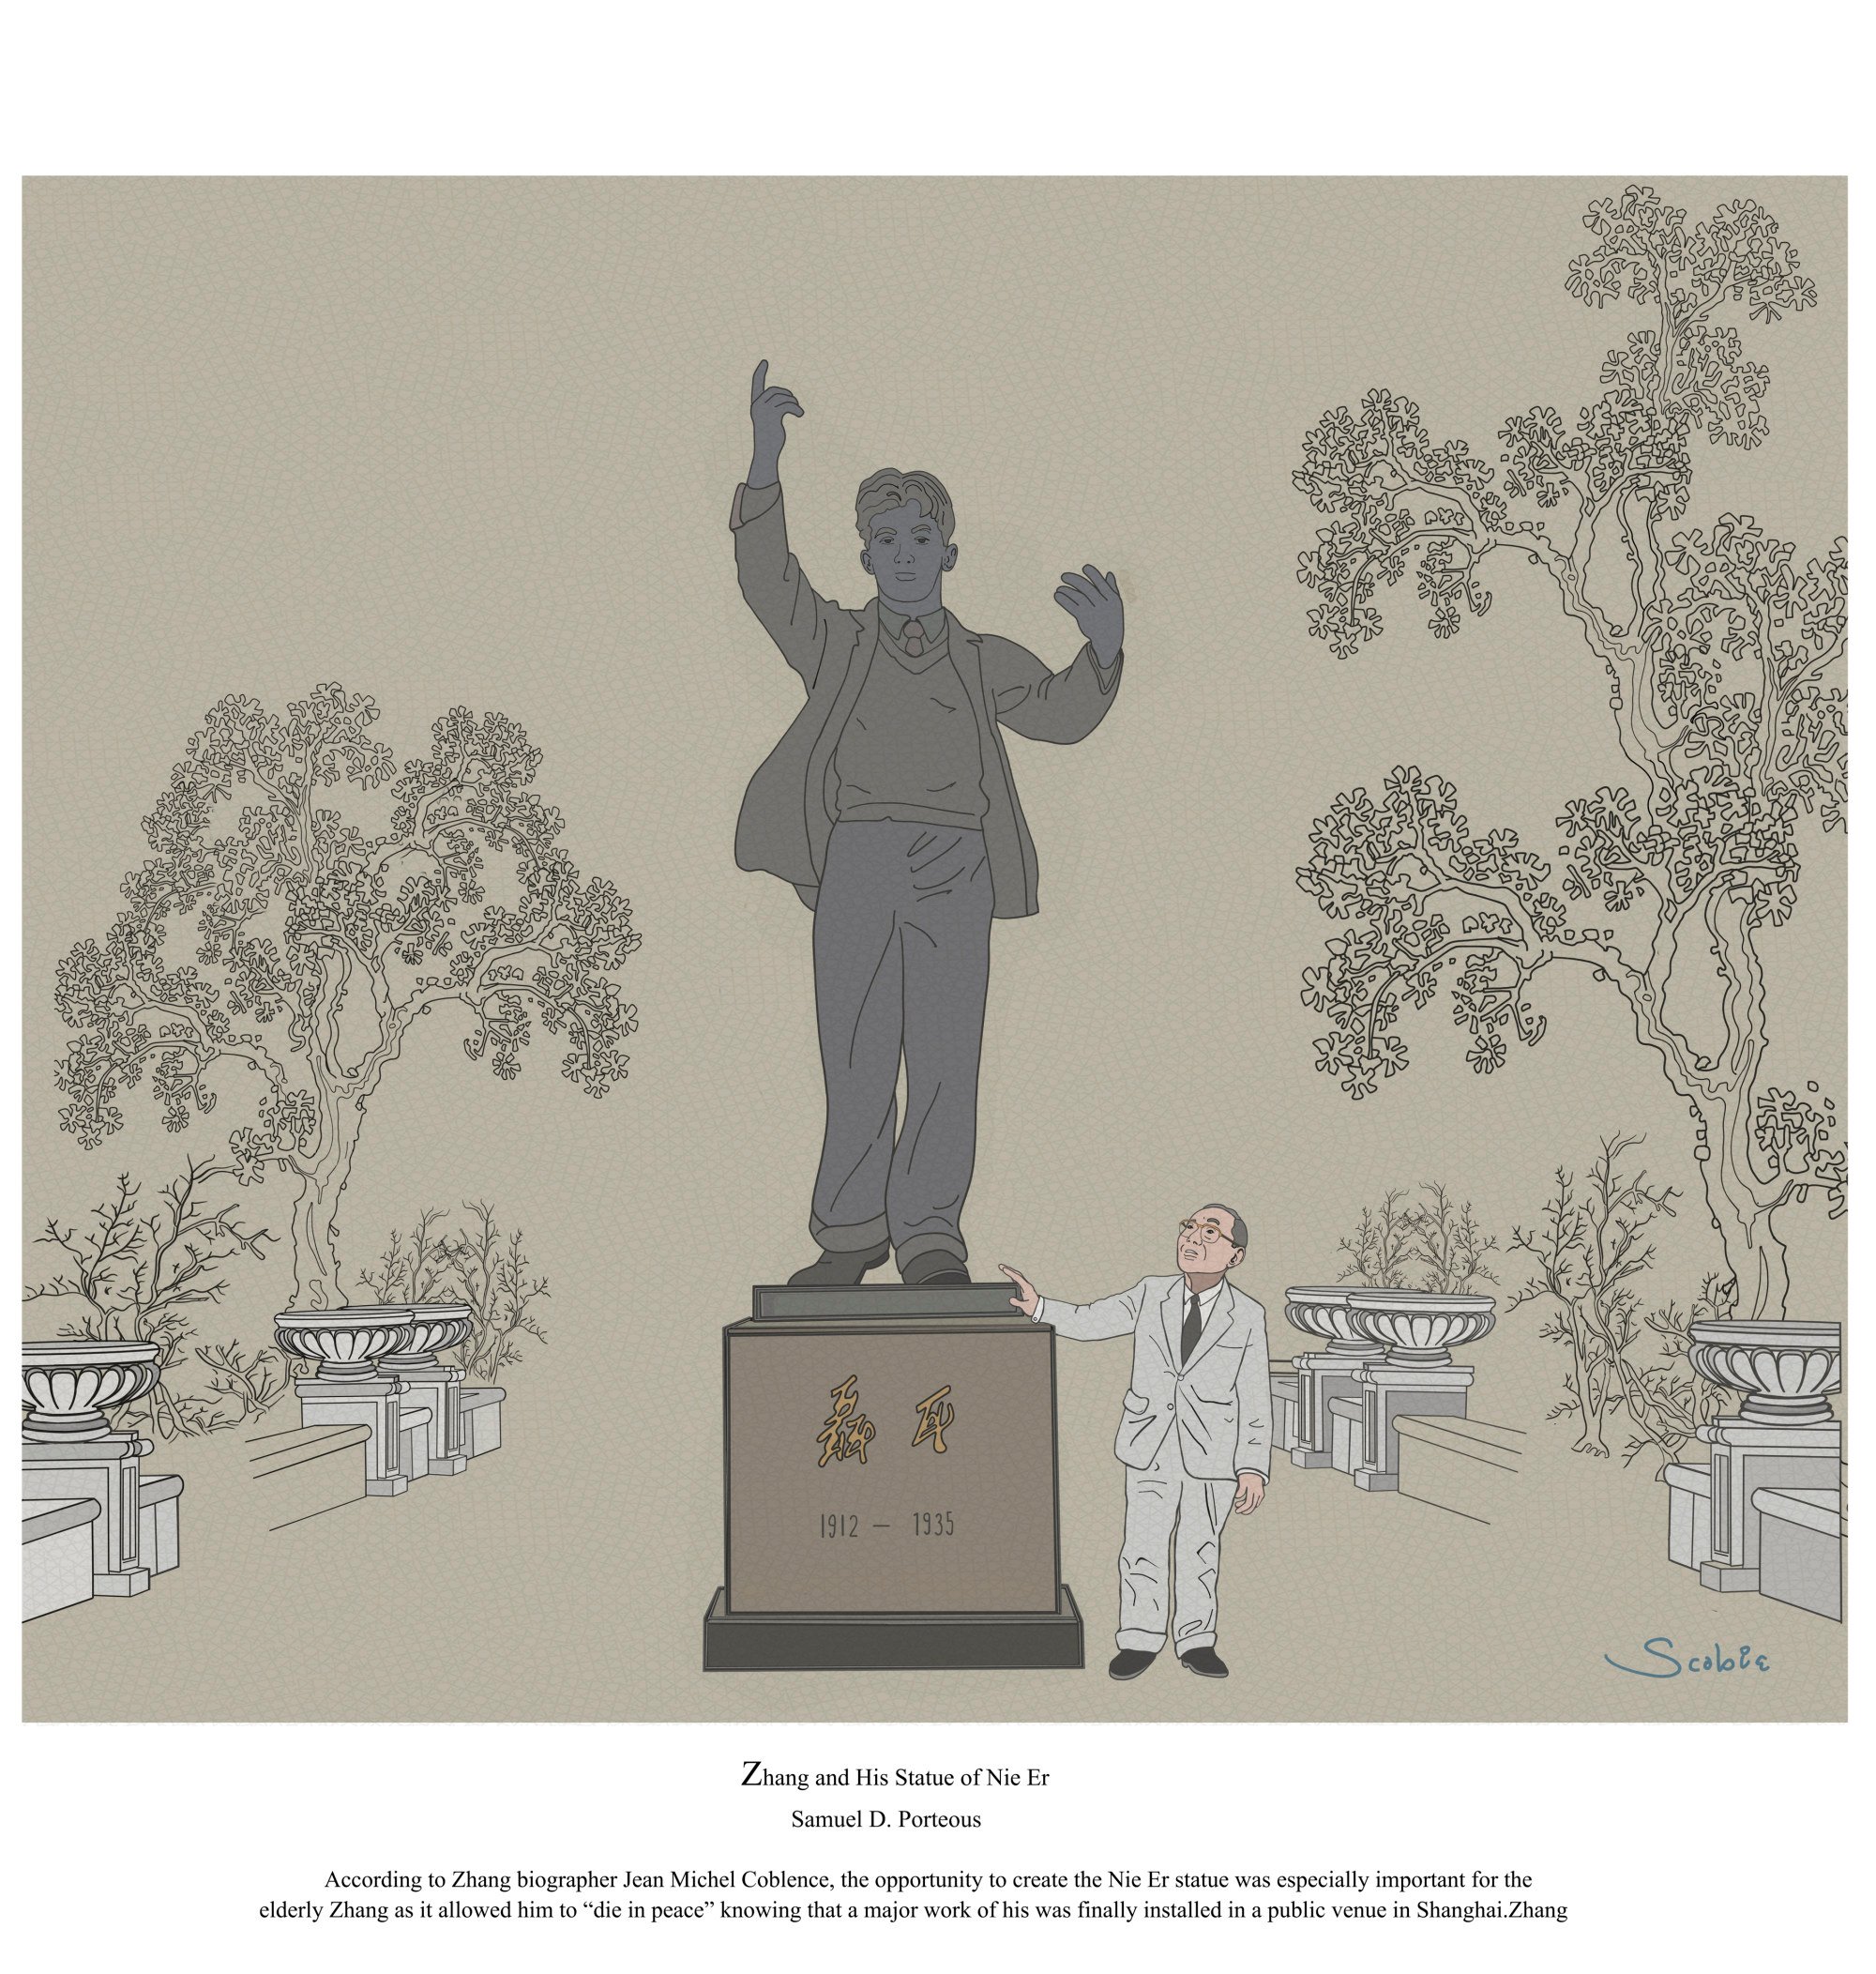 An elderly Zhang with the public statue of Nie Er. Illustration: Samuel Porteous